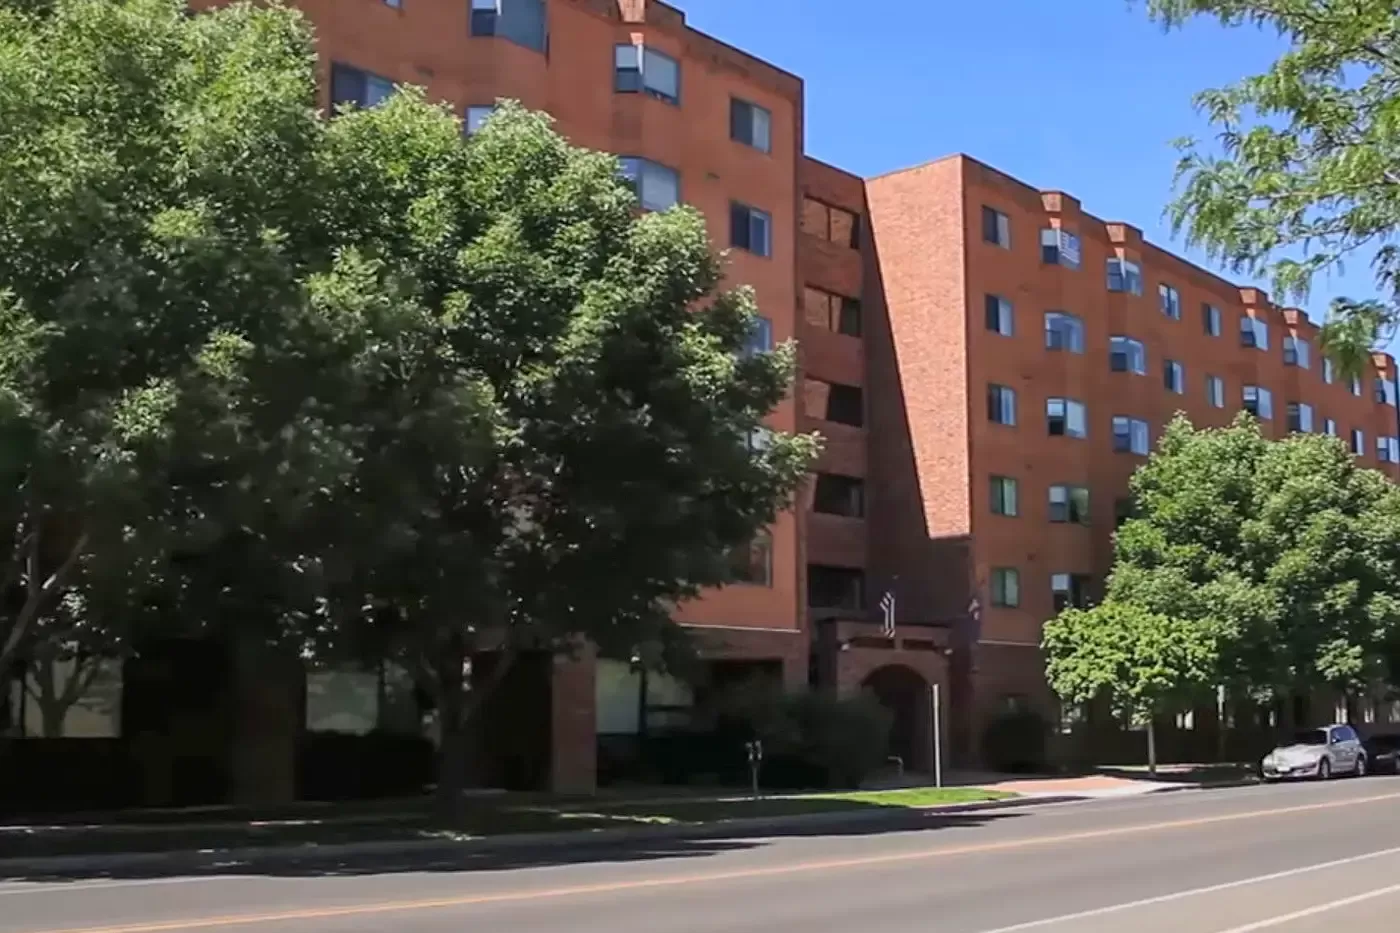 Photo of Ratekin Tower Apartments in Grand Junction, Colorado